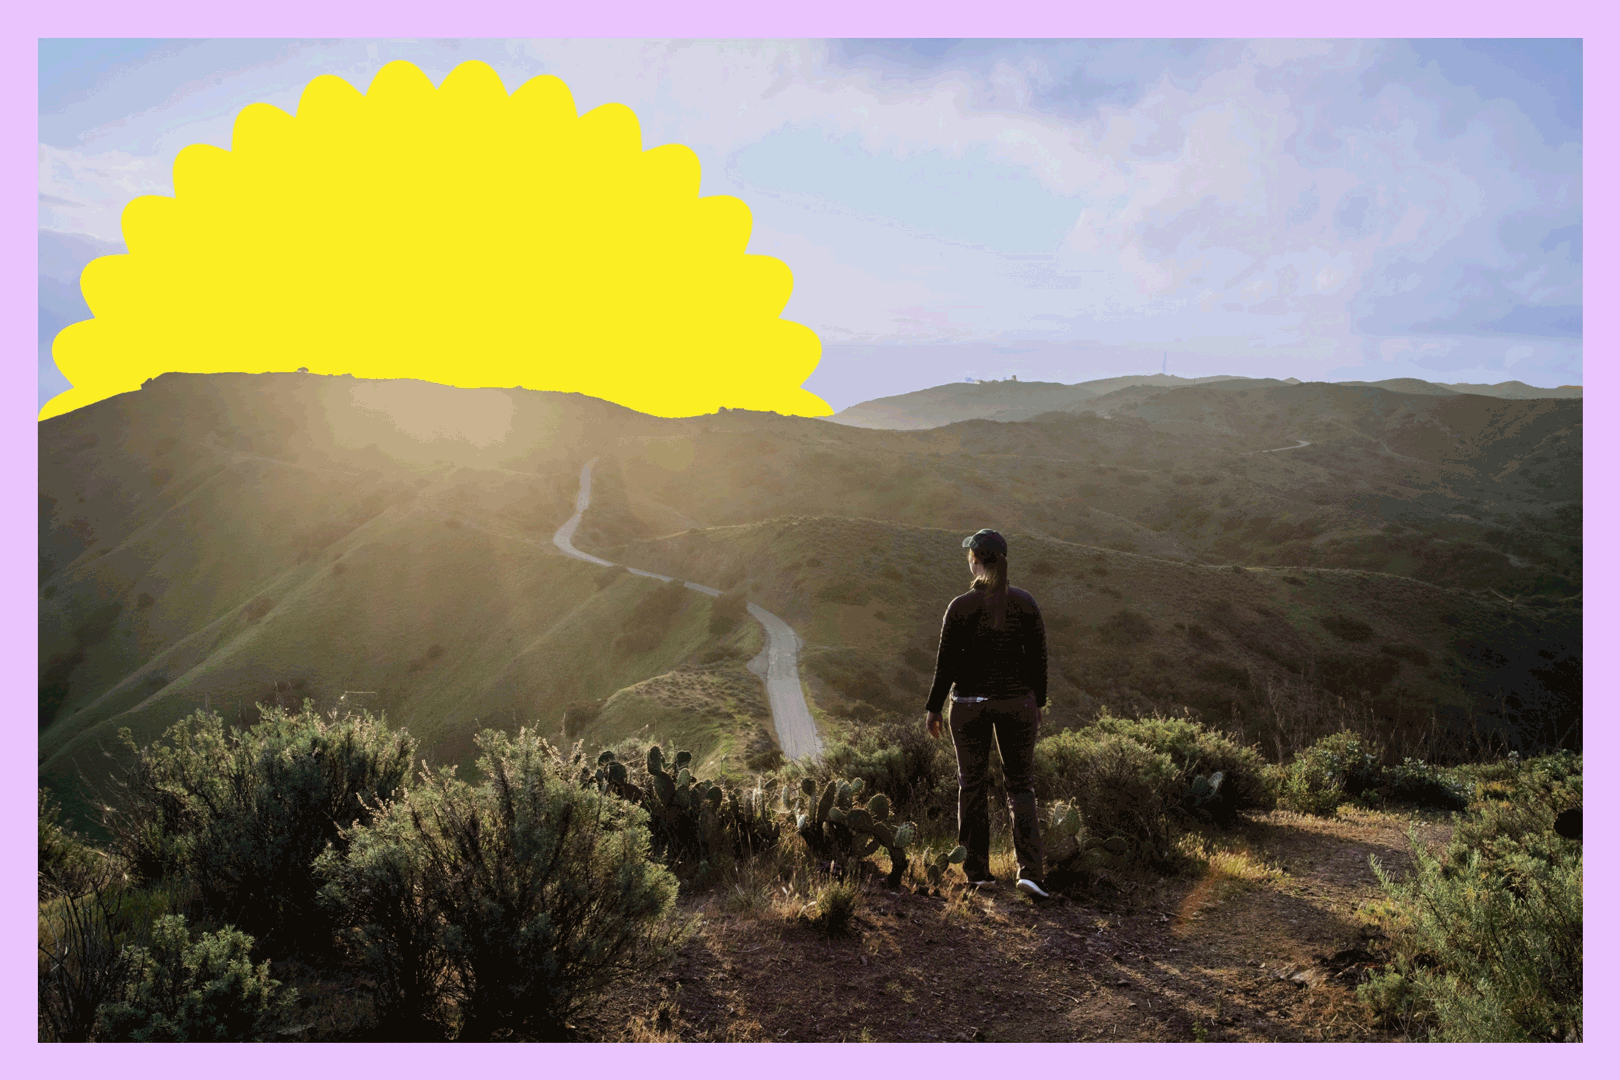 A hiker looks at the sunset over a trail and hills.